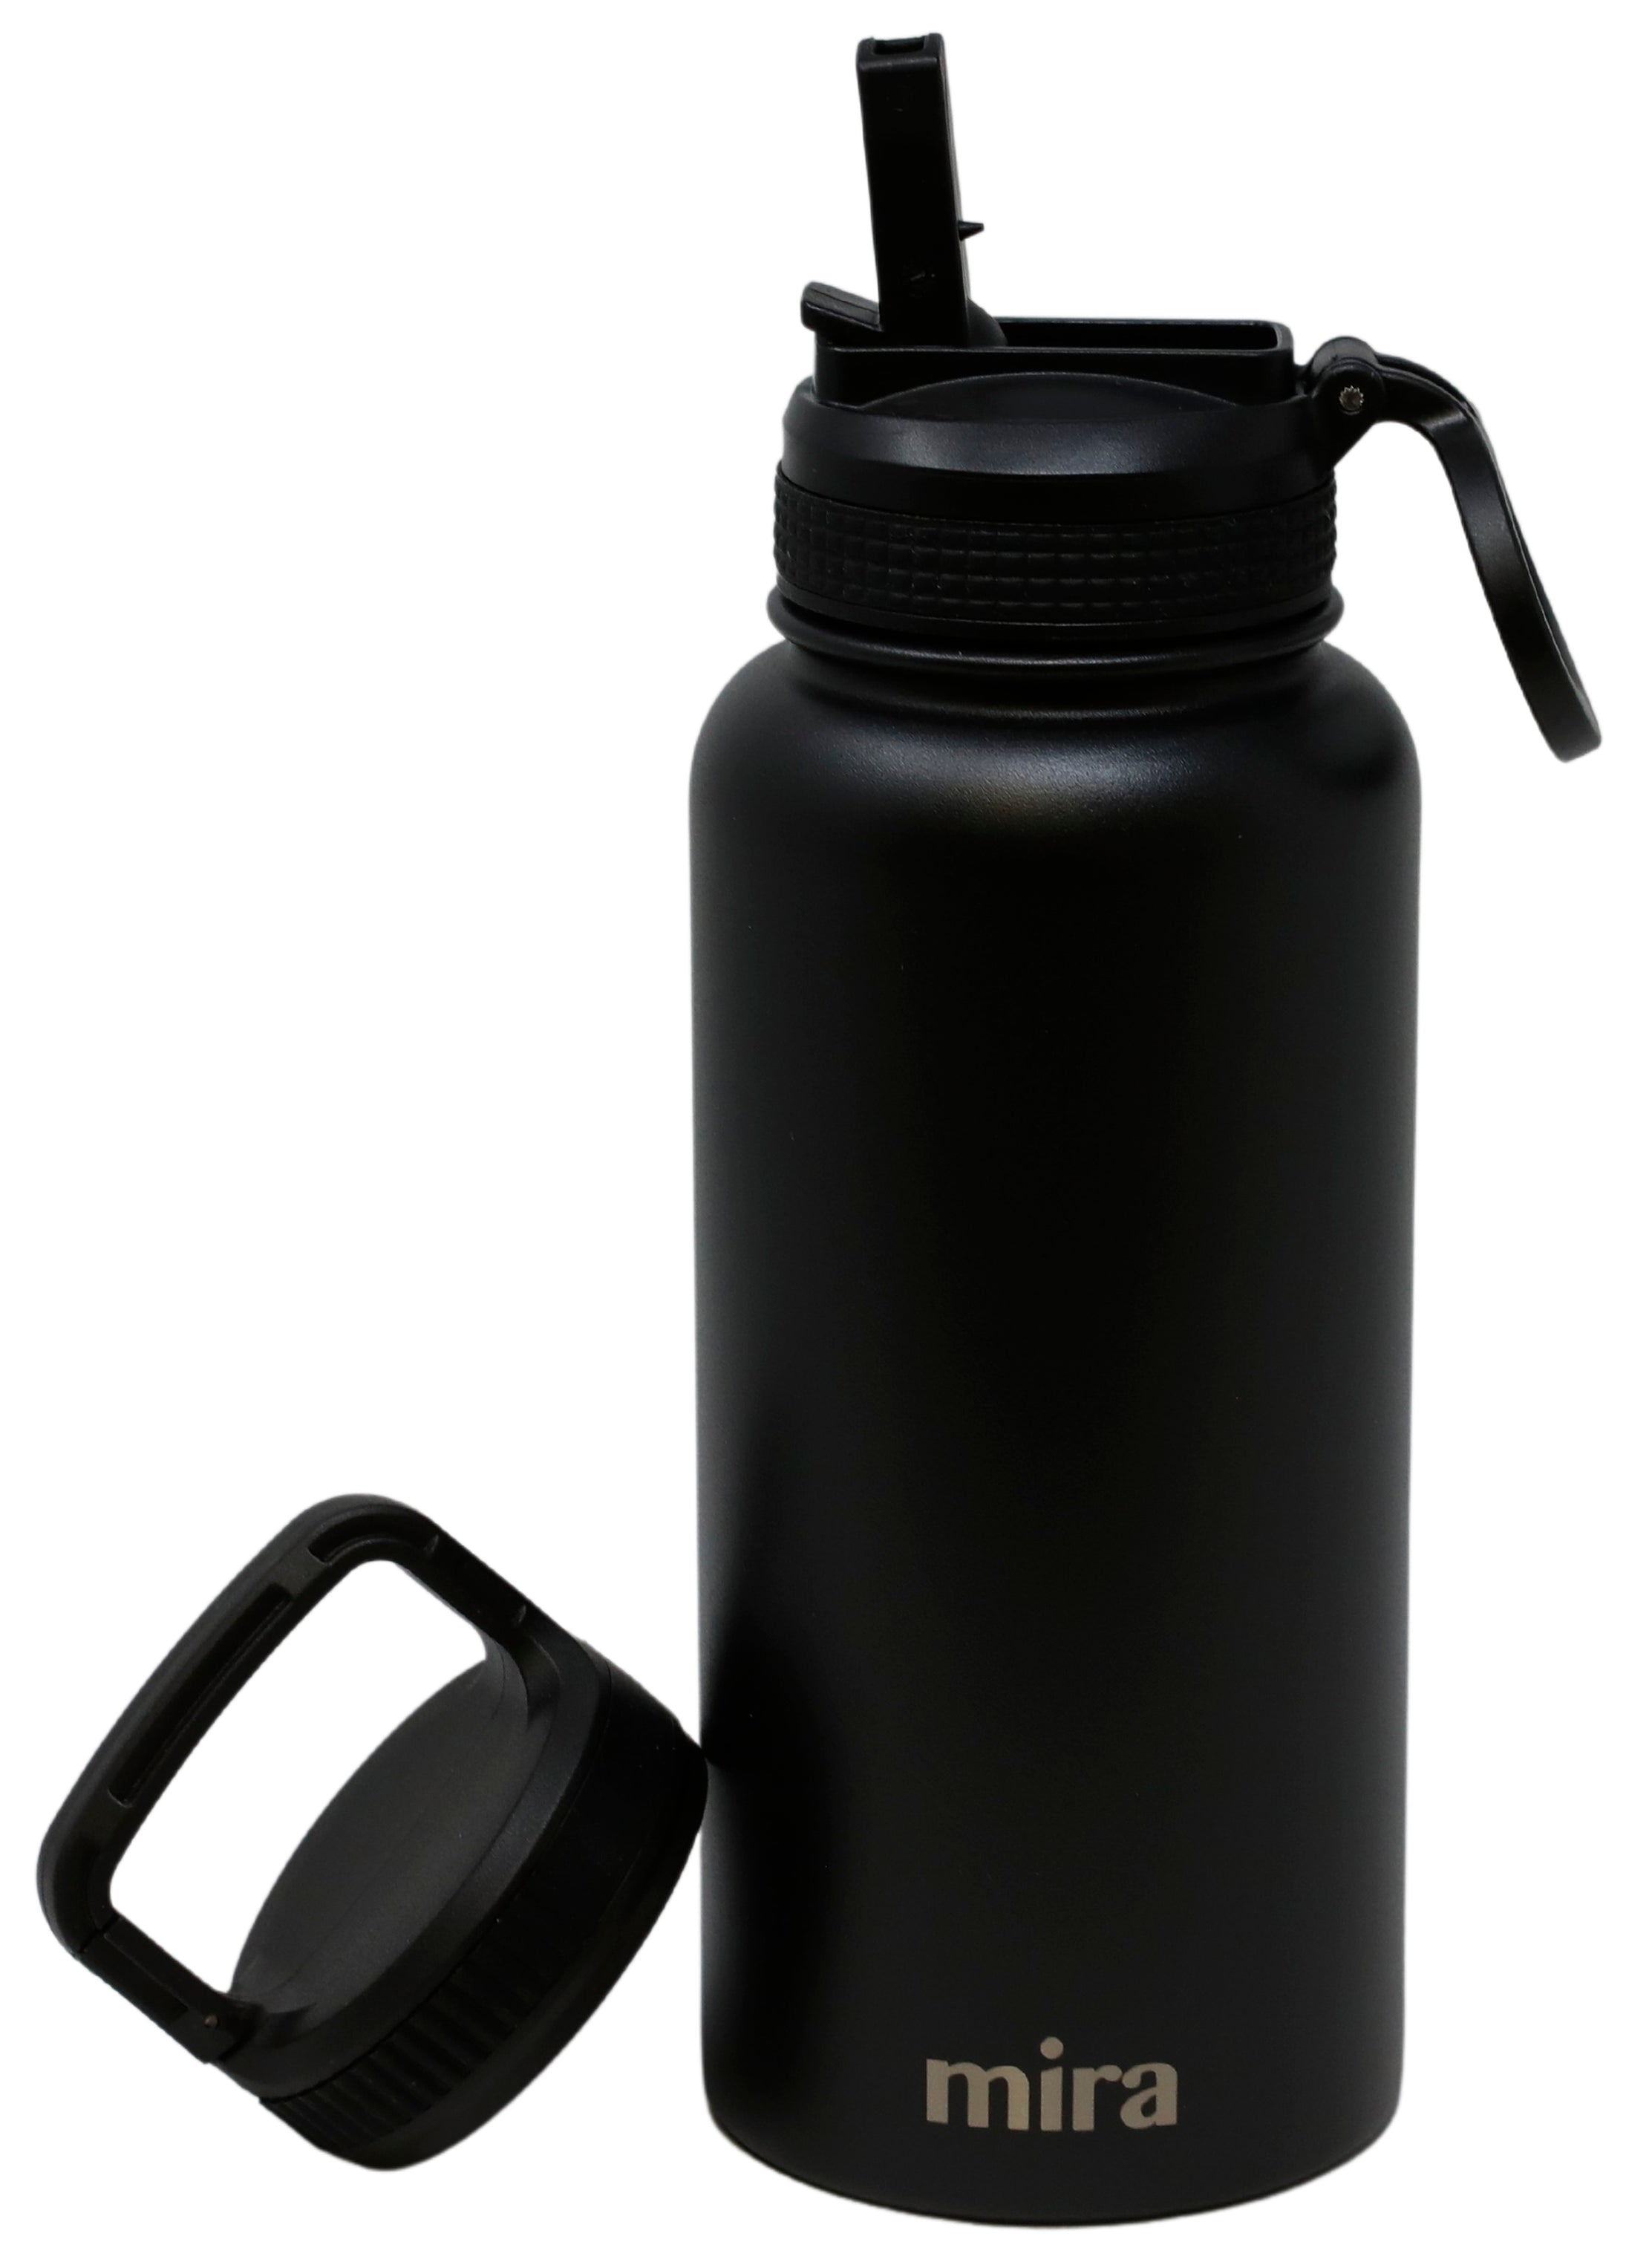 MIRA 32 oz Stainless Steel Insulated Sports Water Bottle - 2 Caps